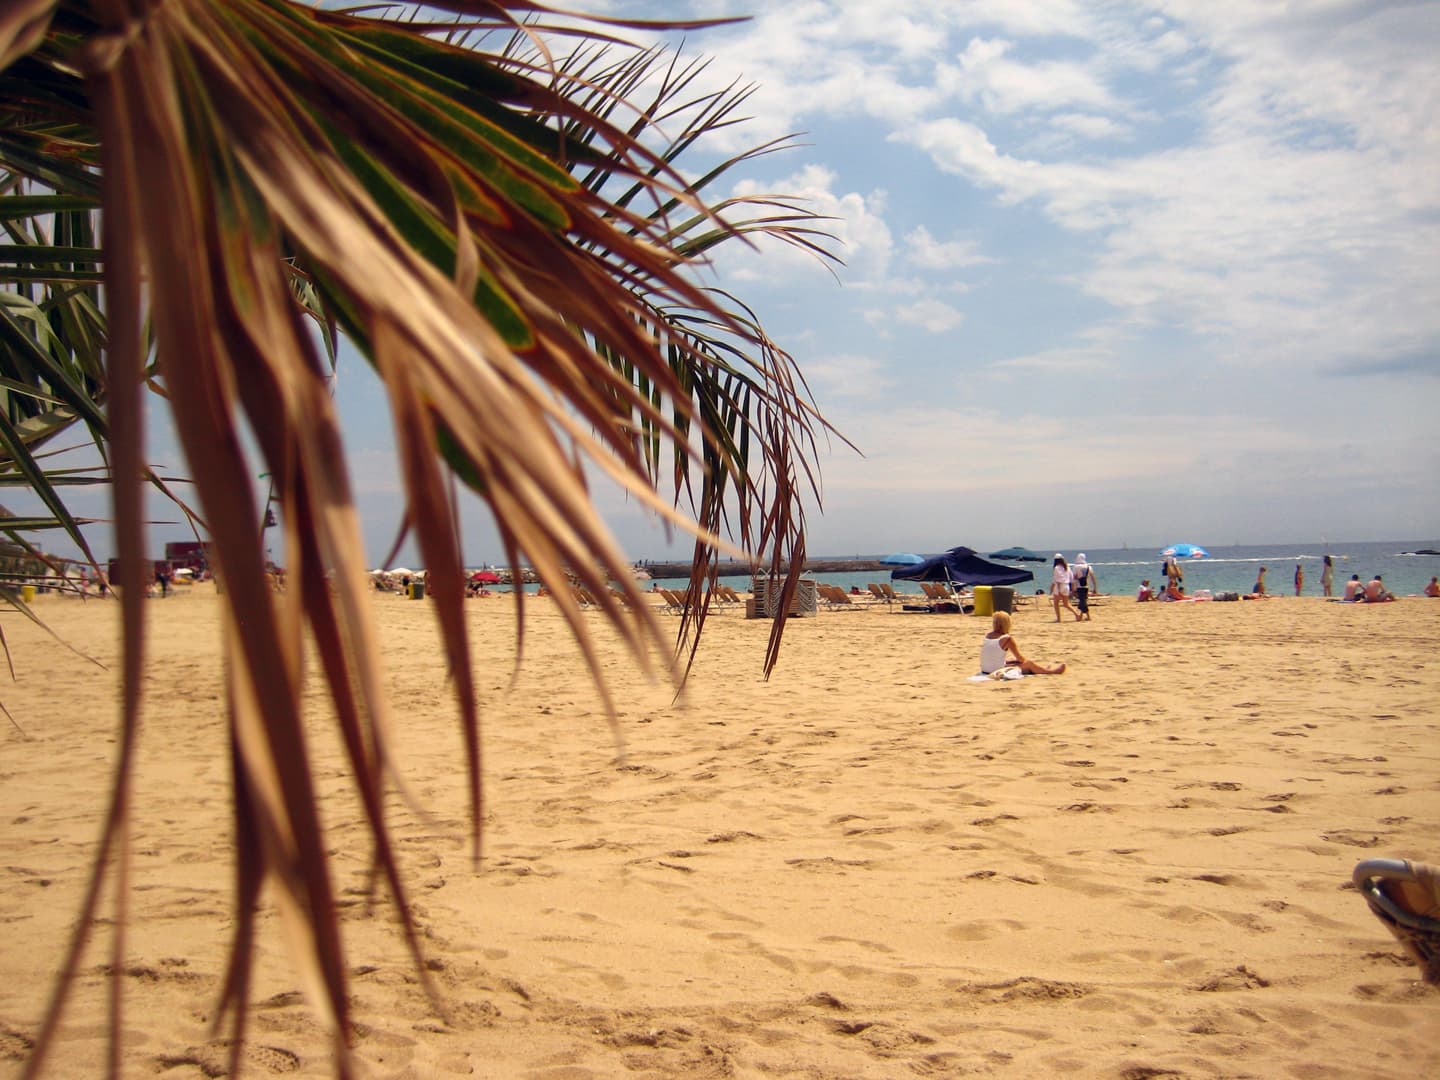 Peaceful scene at Barceloneta beach looking through palm leaves at people lounging about